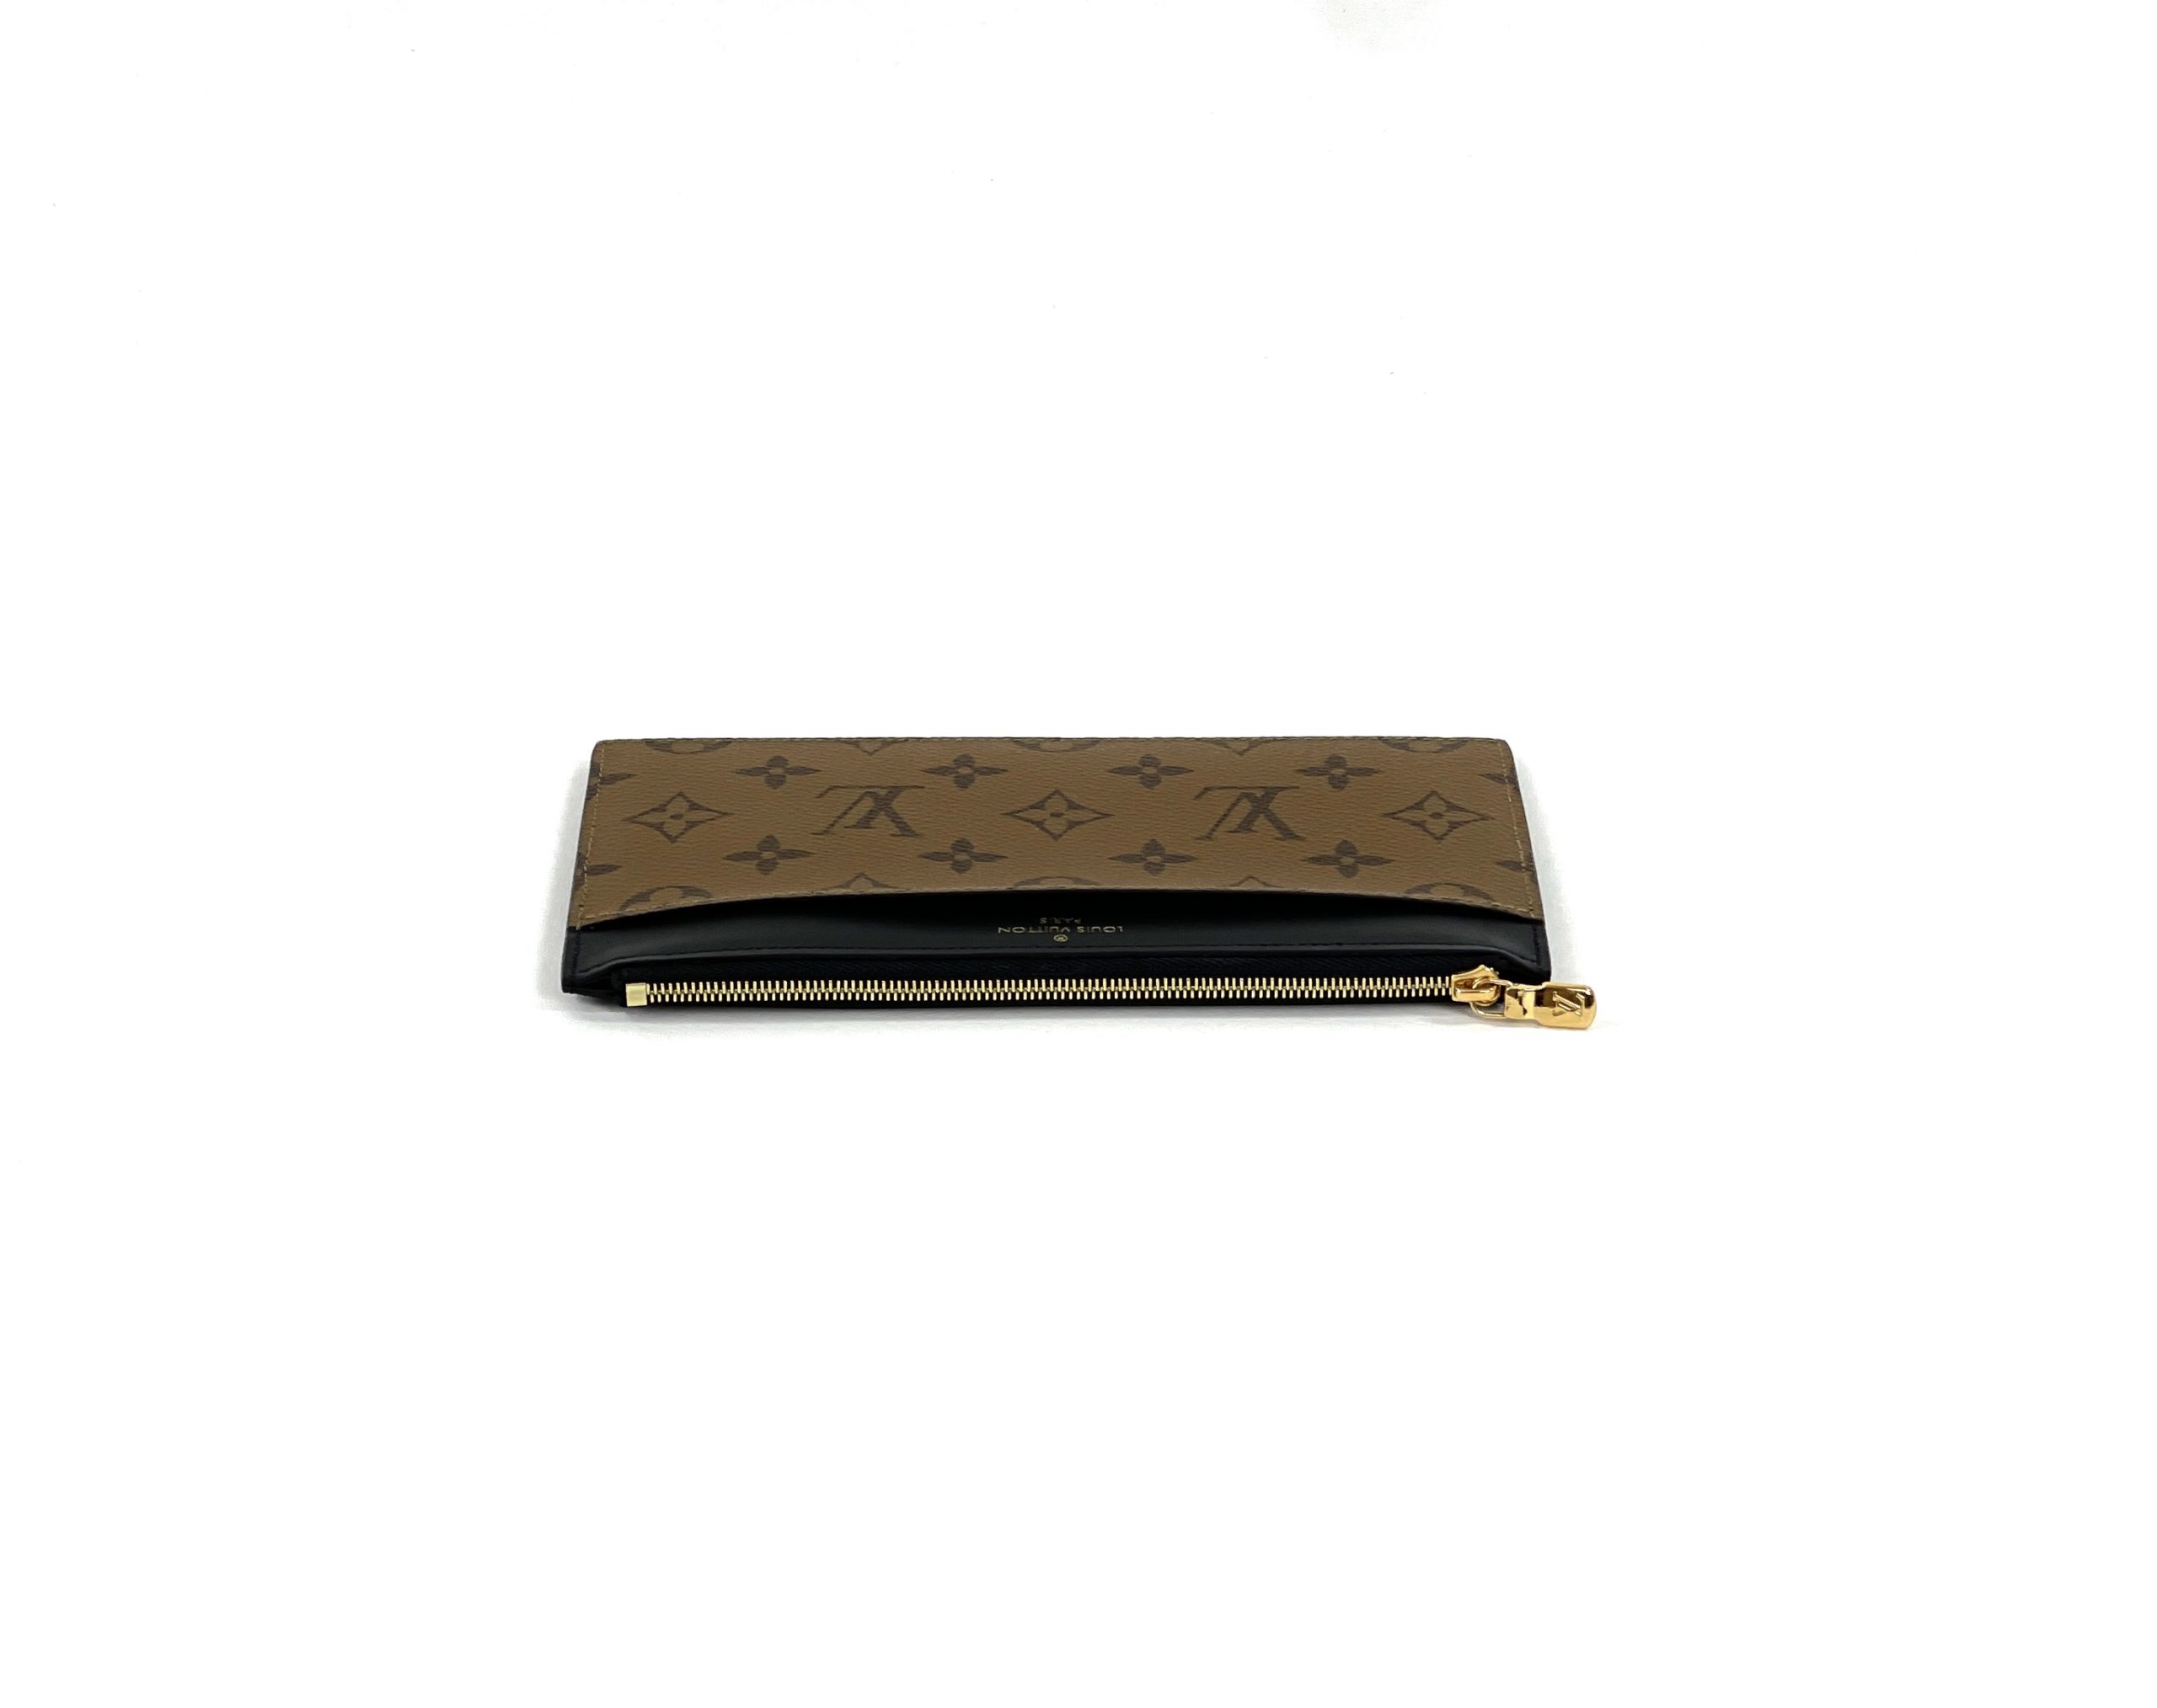 Louis Vuitton slim wallet/purse. This came with a